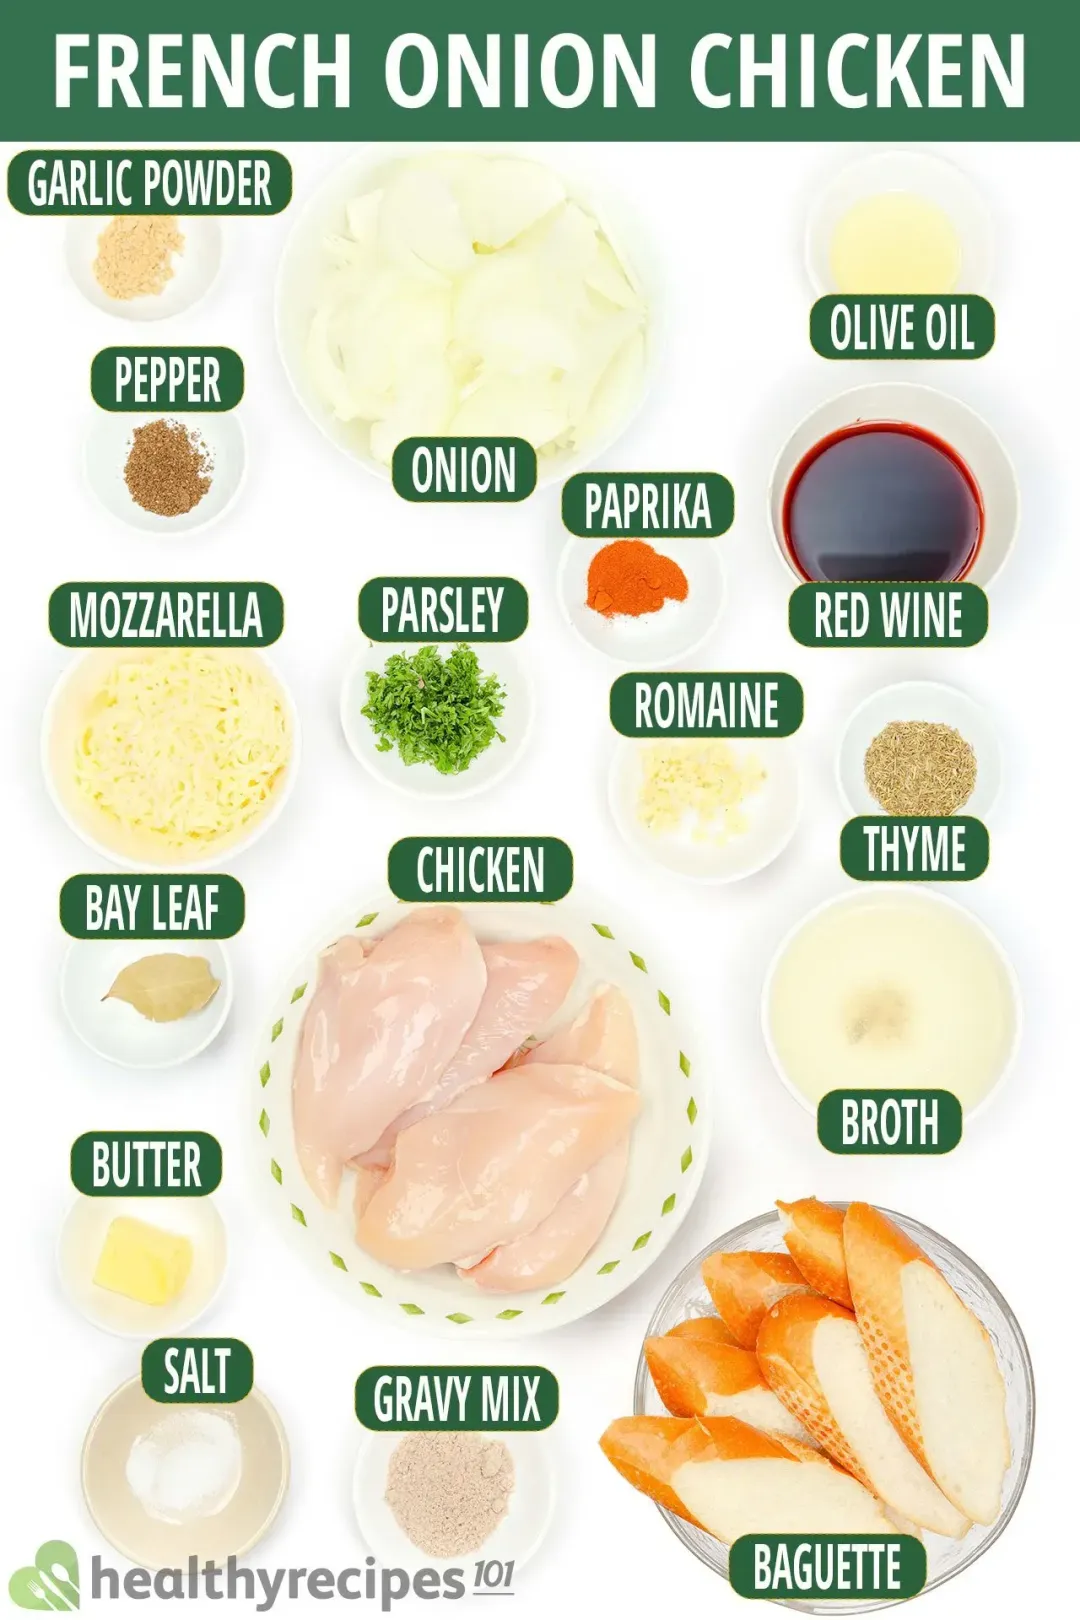 Ingredients for French Onion Chicken